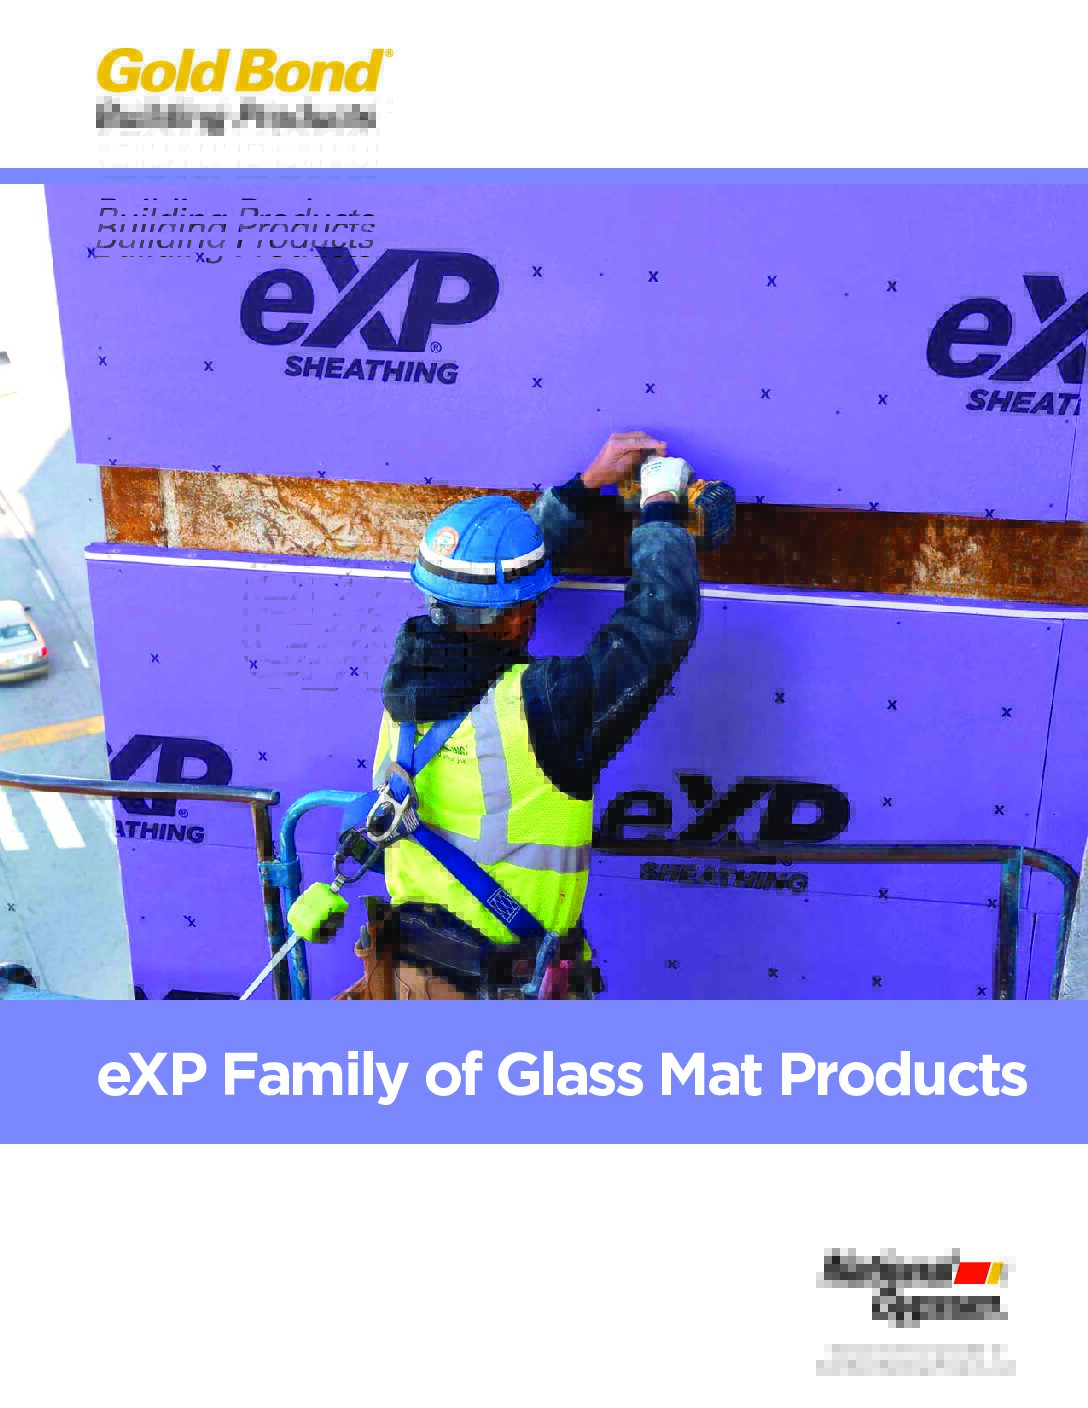 Gold Bond eXP Family of Glass Mat Products Brochure - Document Screen Grab